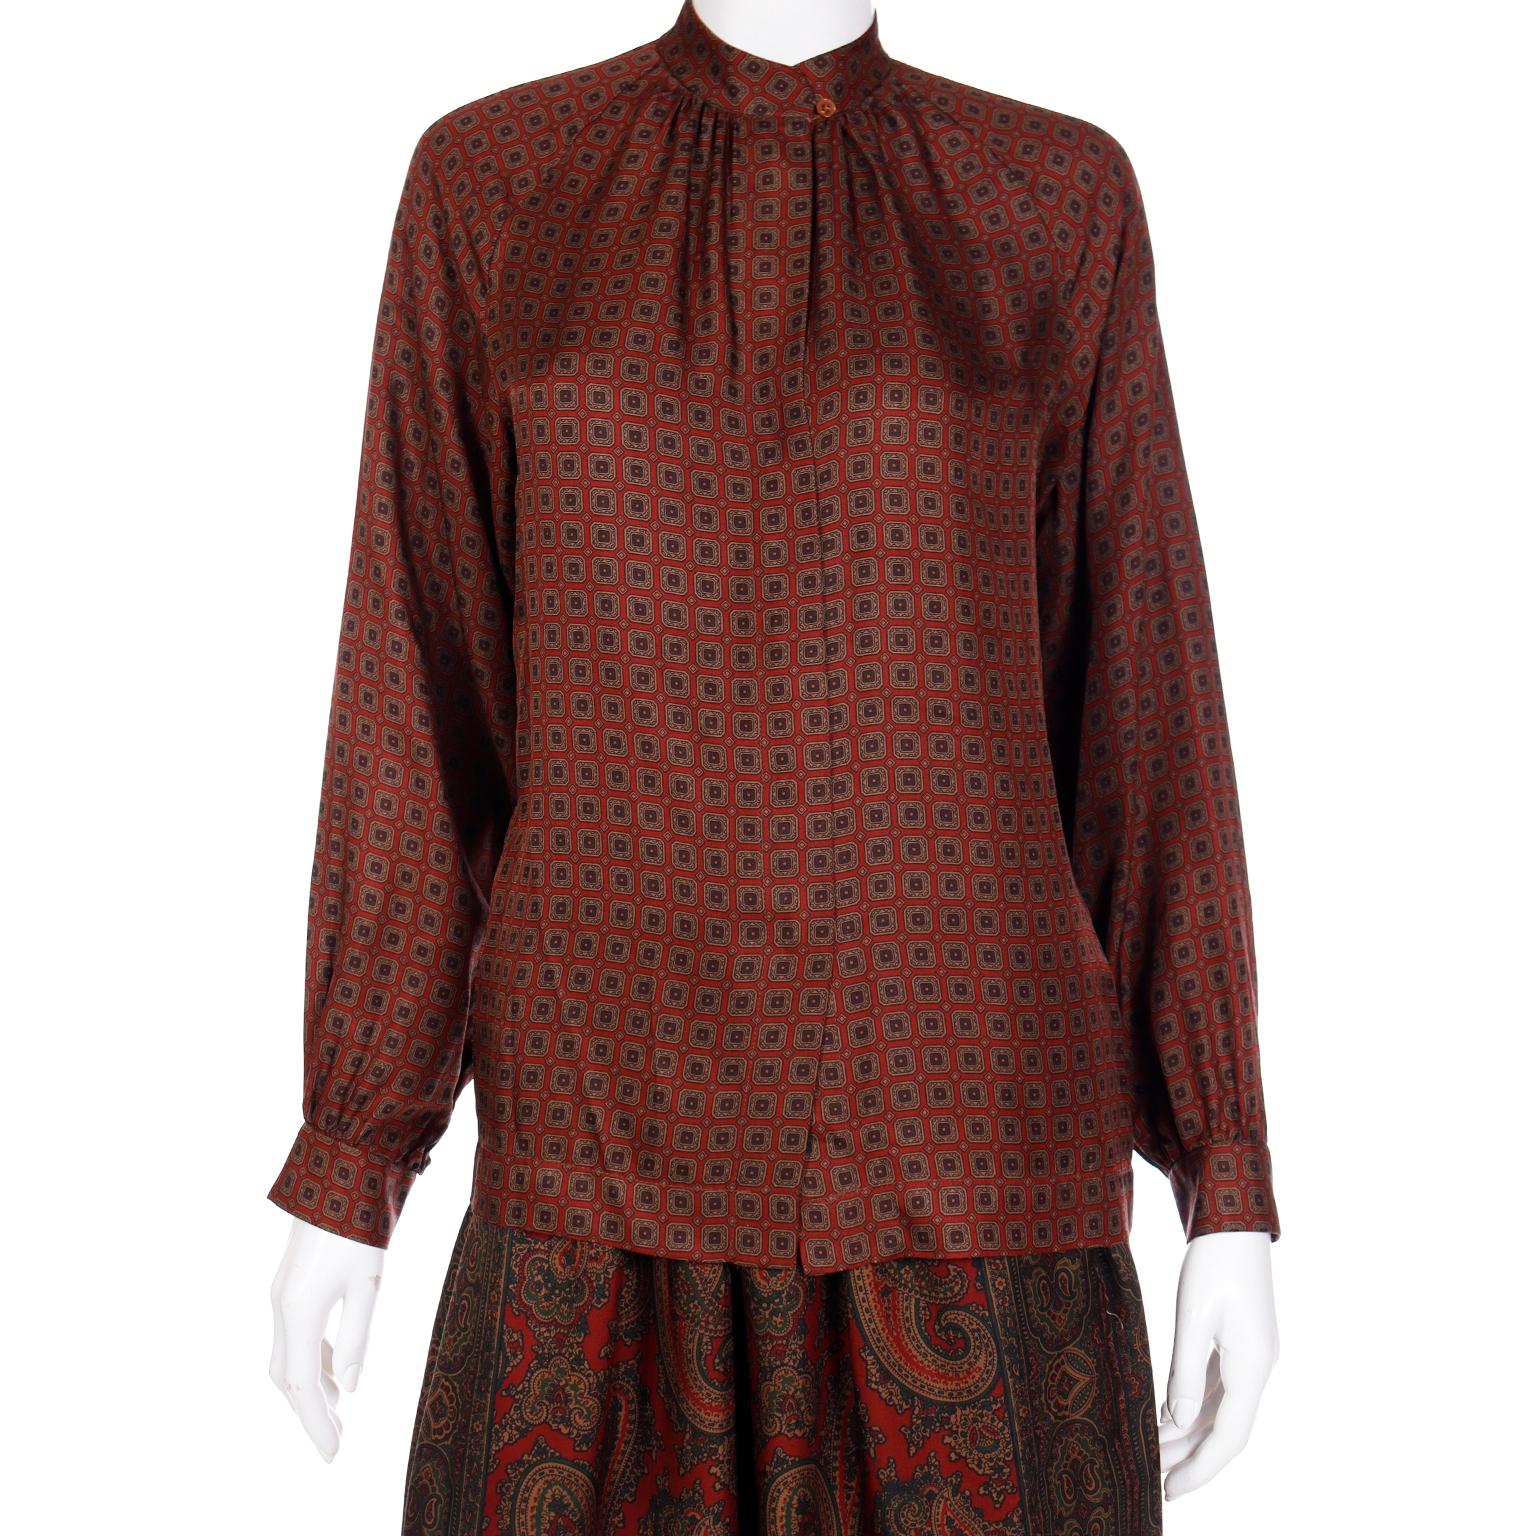 Anne Klein 1970s 3 Pc Blouse & Silk Jacket & Skirt Burgundy Paisley Print Outfit For Sale 4